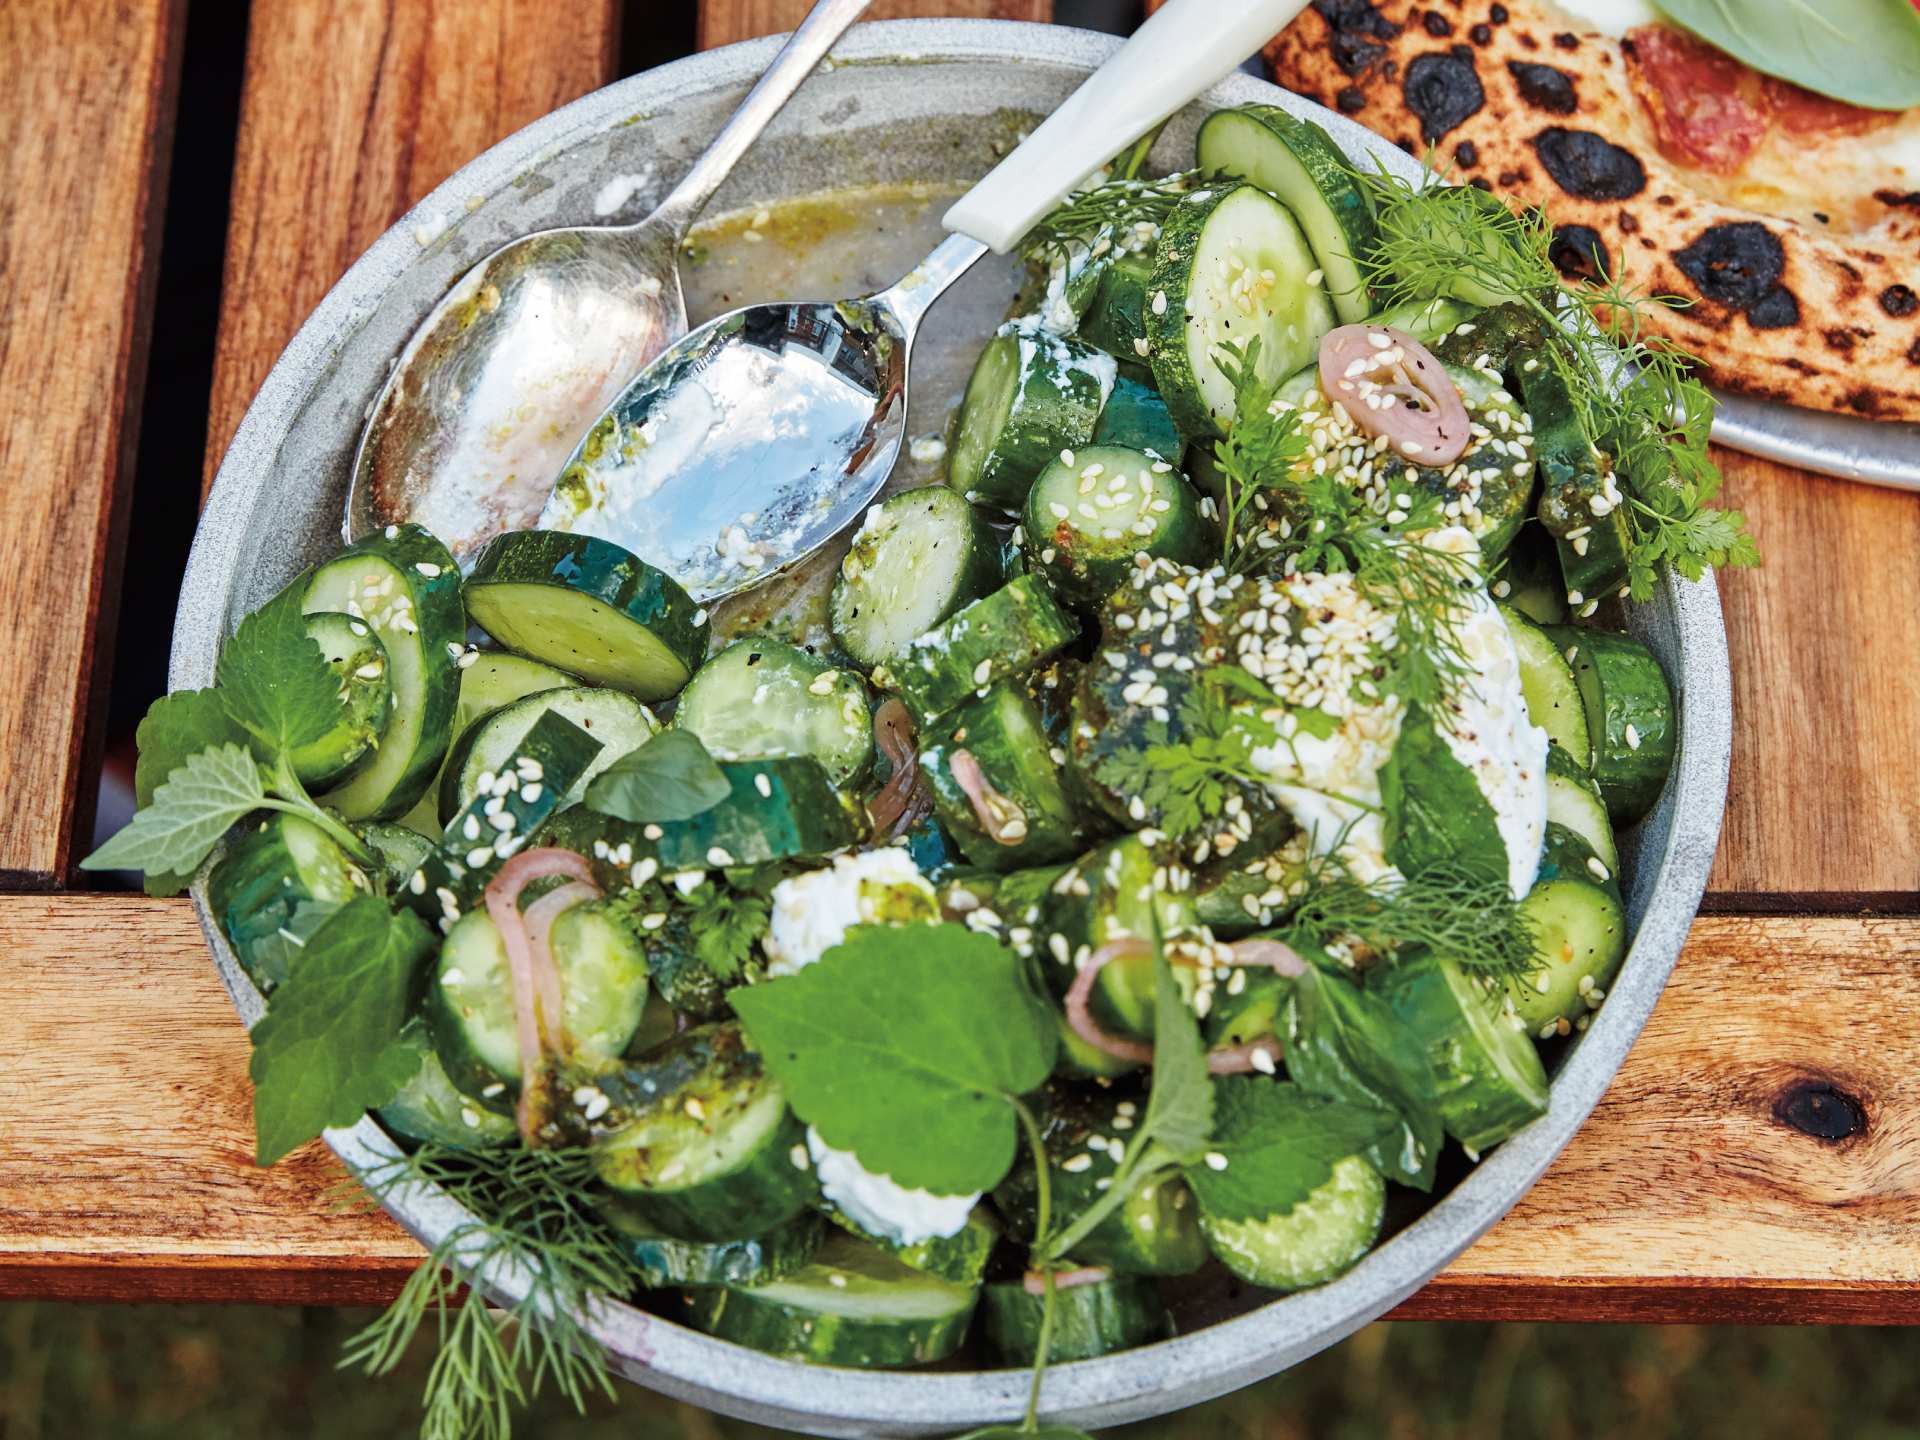 Summer salad recipes | Cucumbers with herby yogurt dressing and sesame seeds